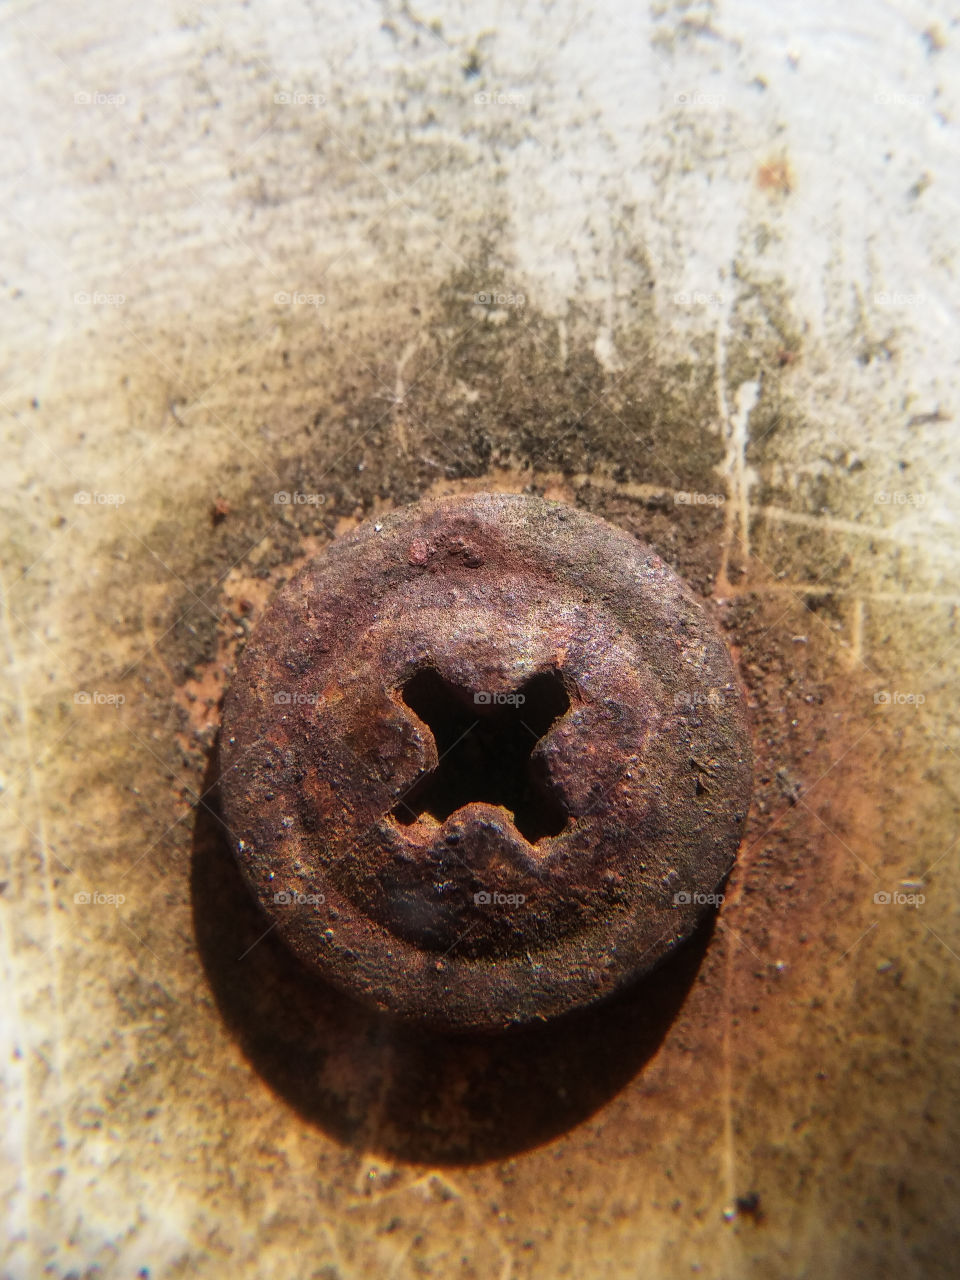 Rusty screw cross type on the dirty bright surface